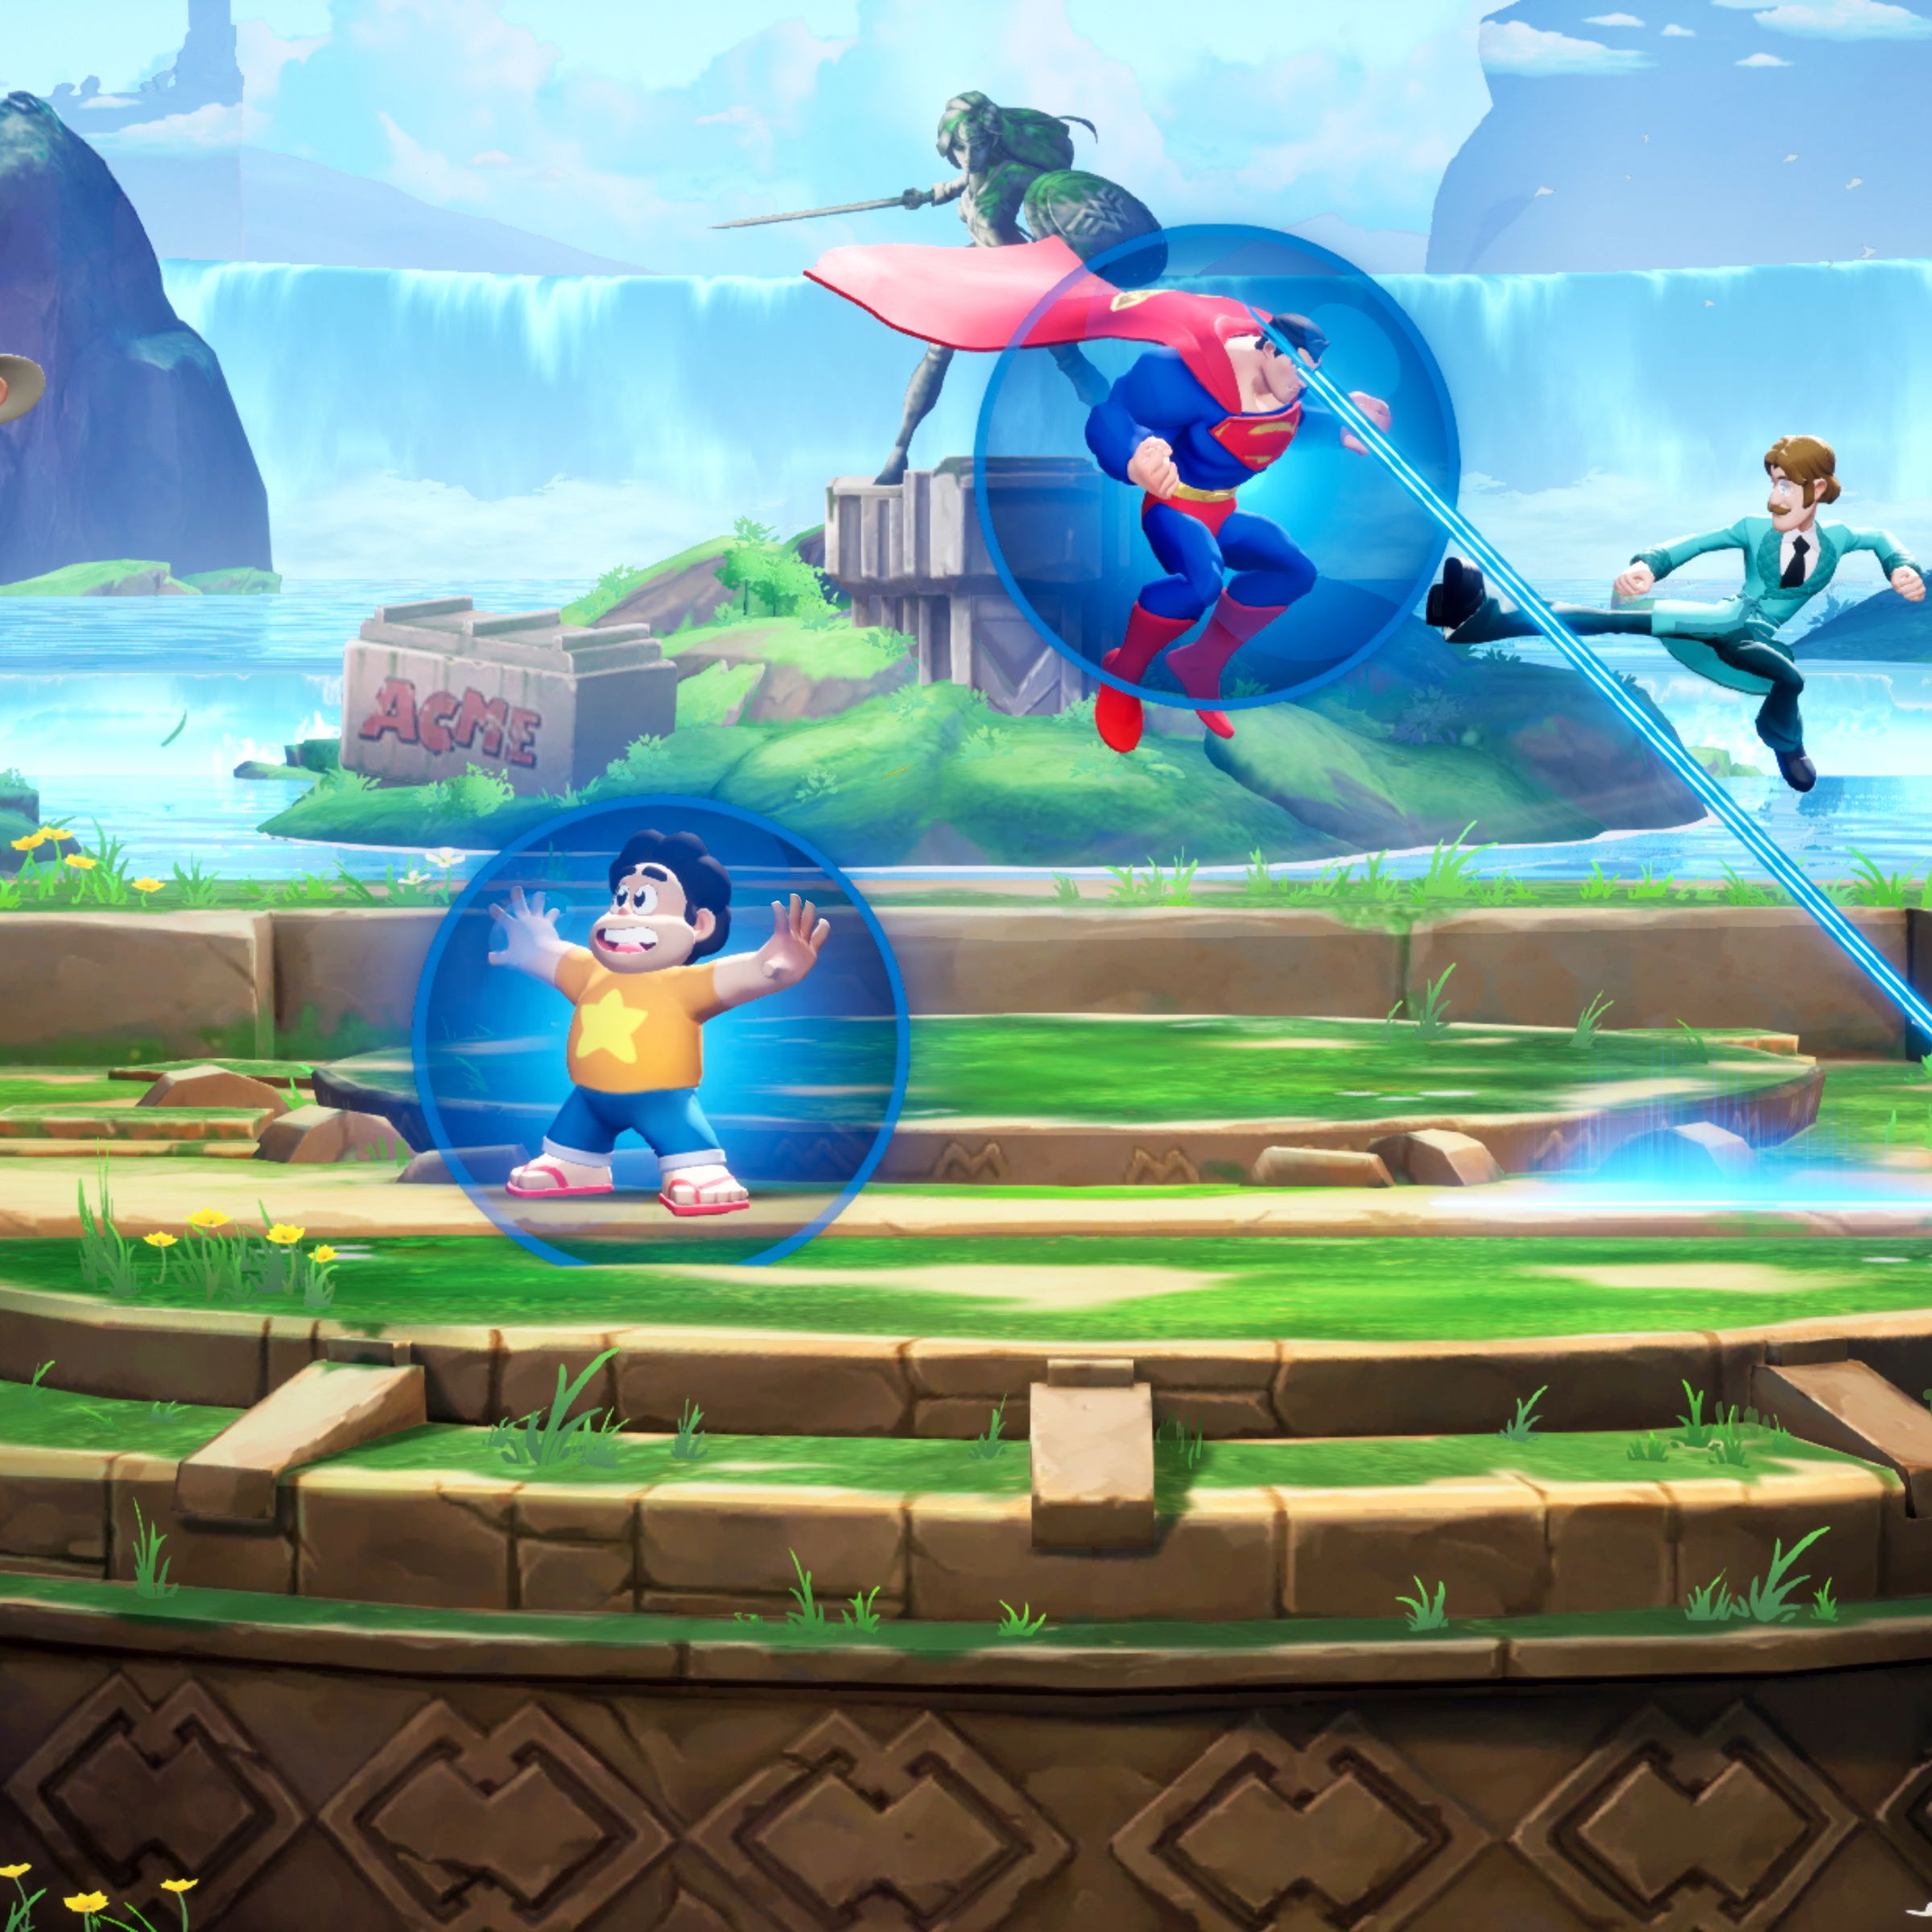 Screenshot from the Multiverus fighting game, featuring a host of Warner Bros. characters including Superman, Steven Universe, Shaggy, and Tom and Jerry.